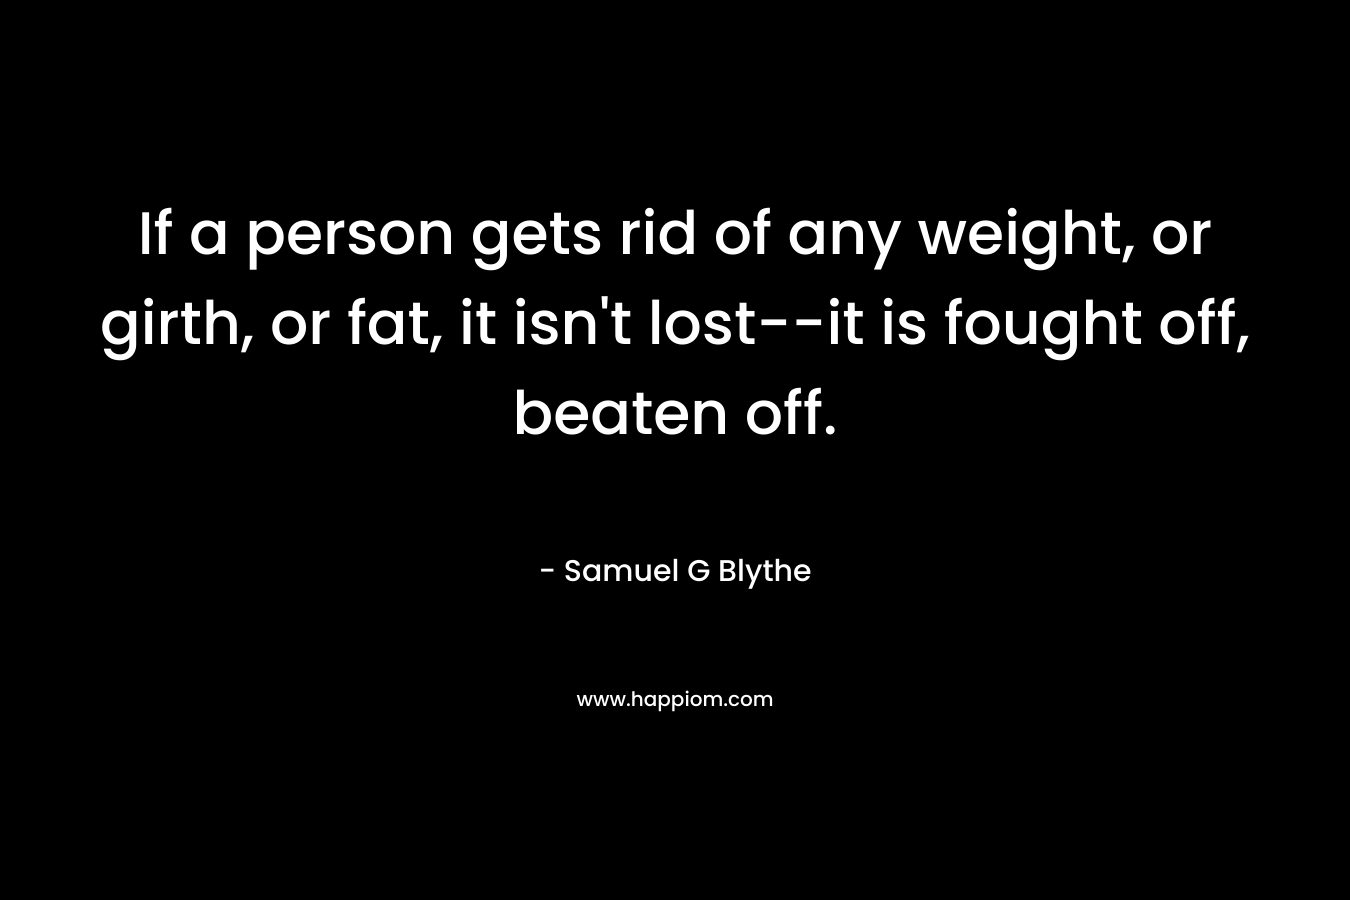 If a person gets rid of any weight, or girth, or fat, it isn't lost--it is fought off, beaten off.